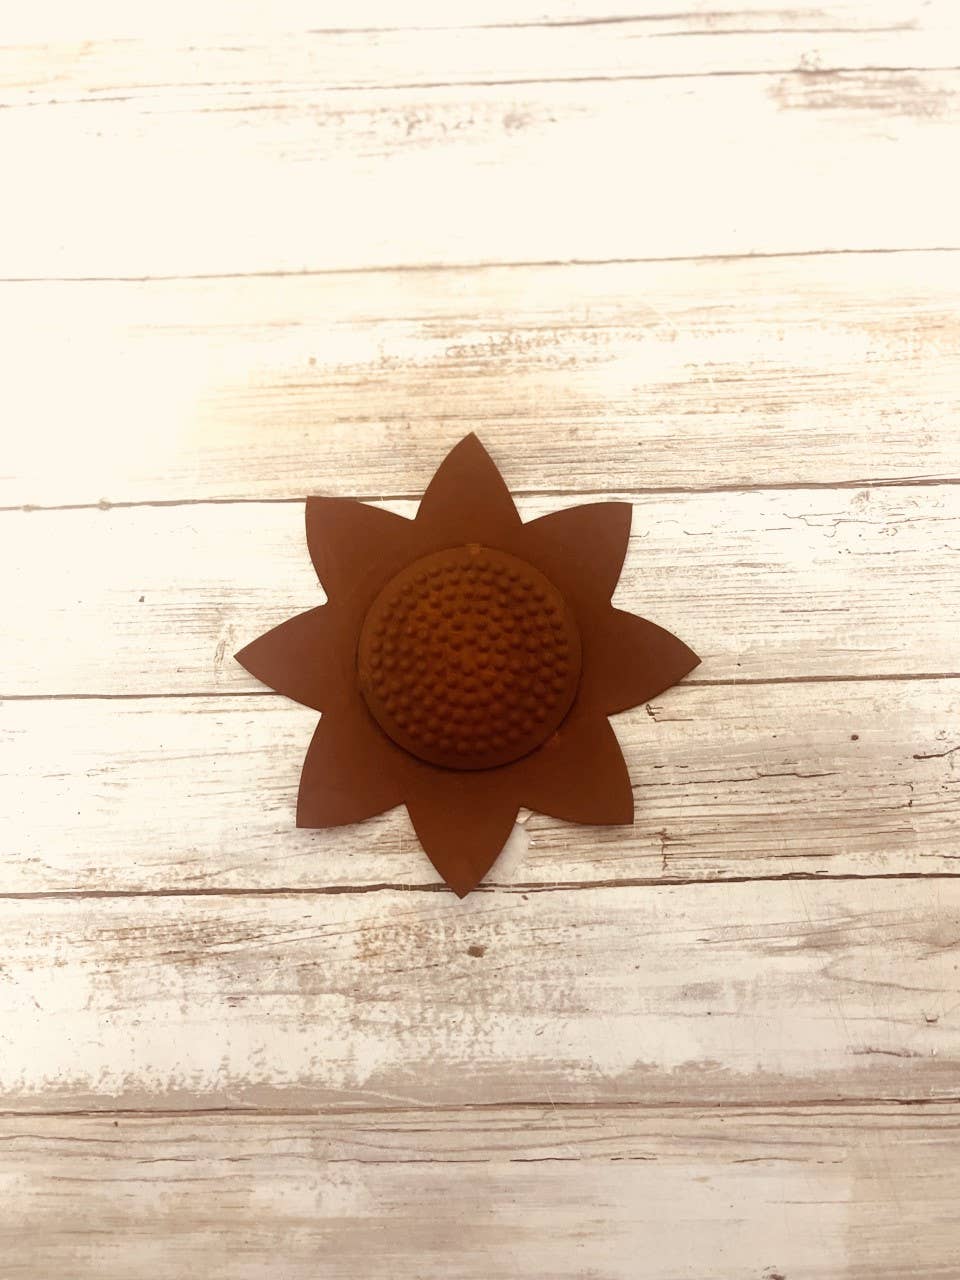 Flower Lilly 3D Rustic 6 Inch Garden Magnet Home Decor